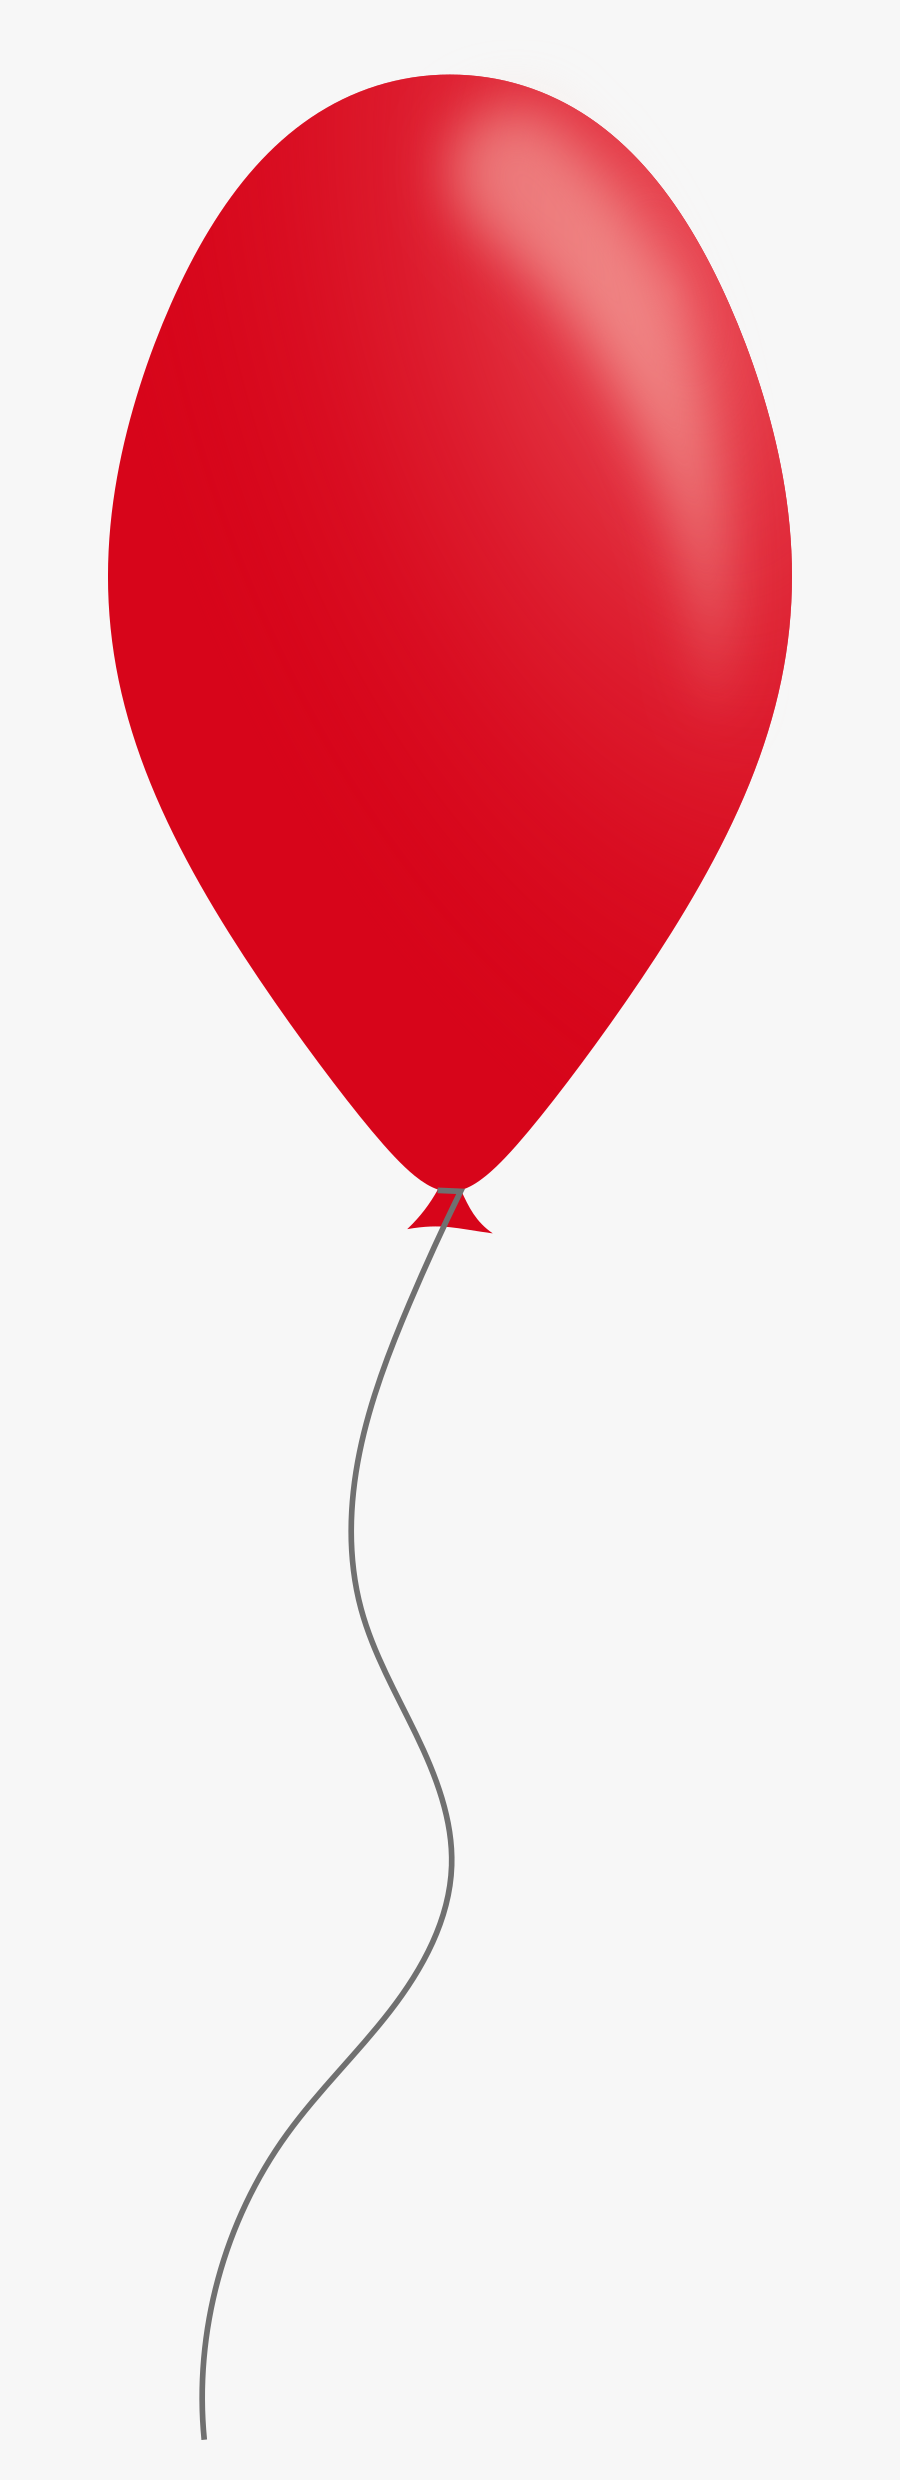 Transparent Heart Balloon Clipart - Red Single Balloon Png, Transparent Clipart